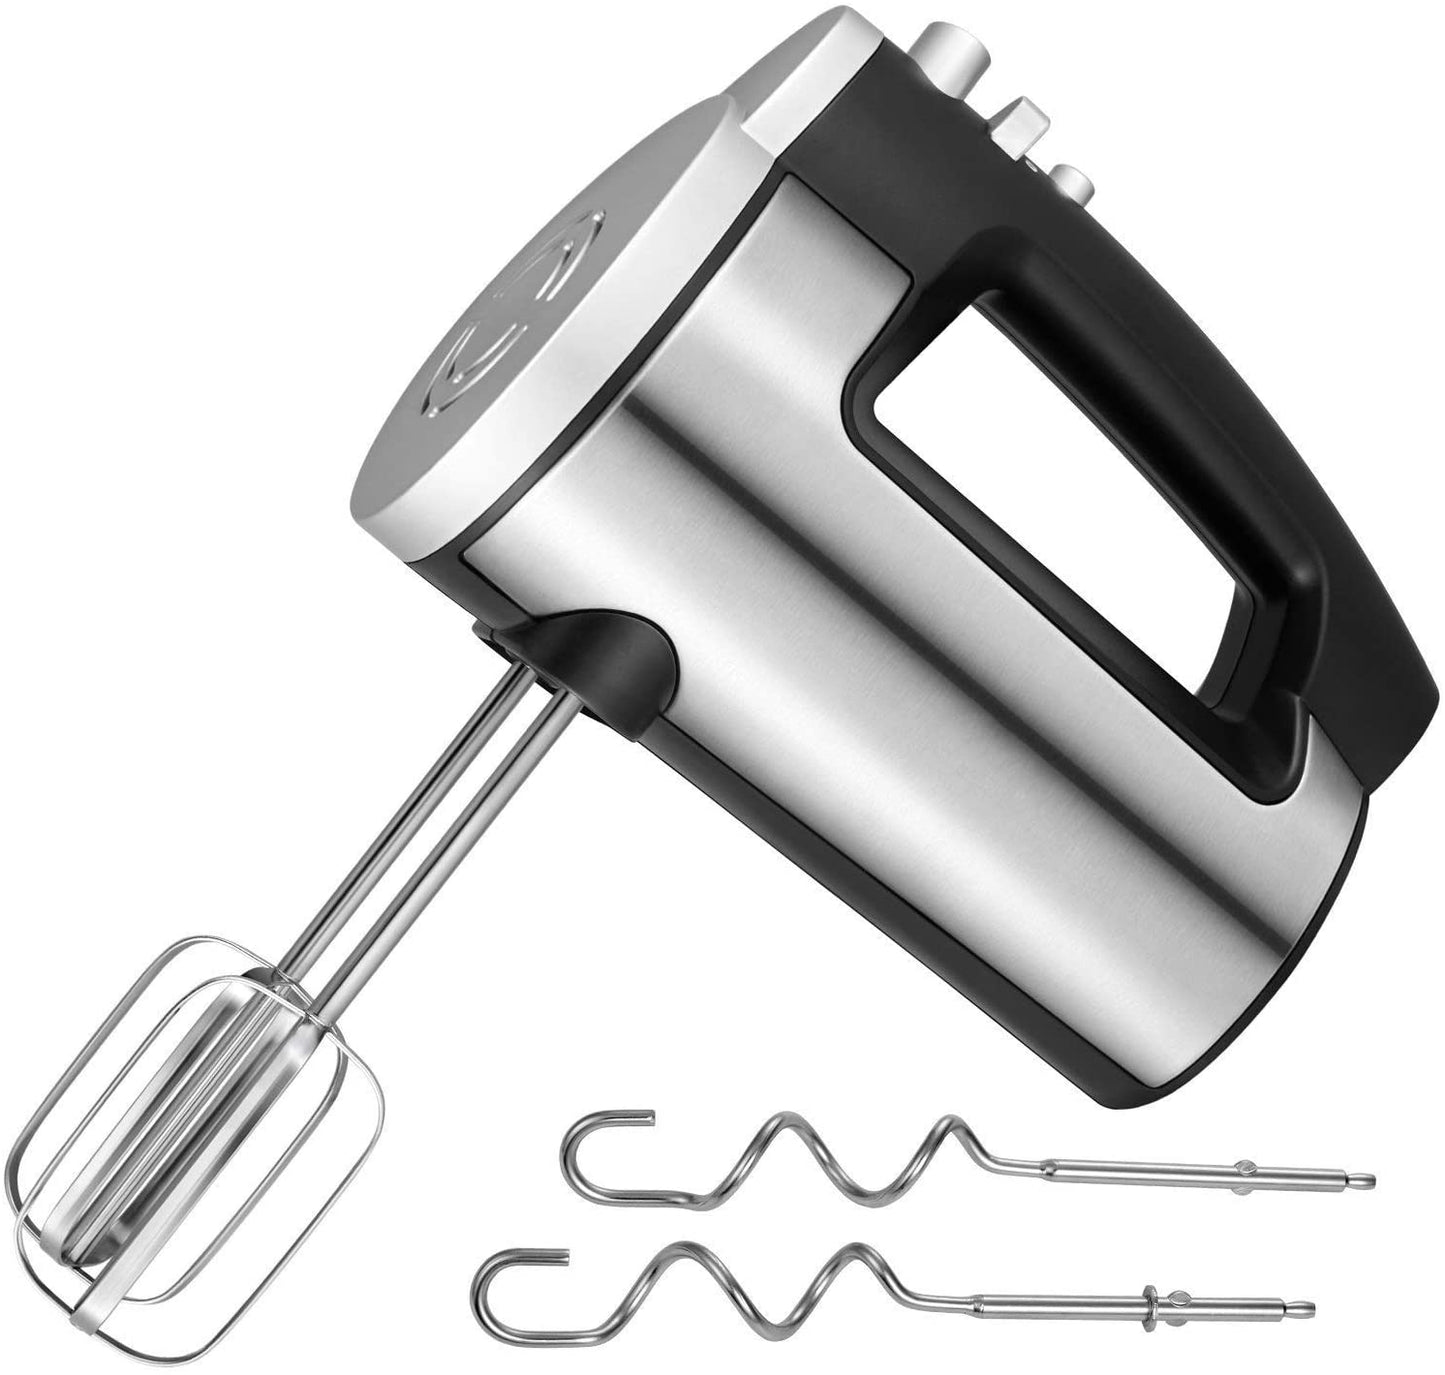 Stainless Steel Electric Hand Mixer